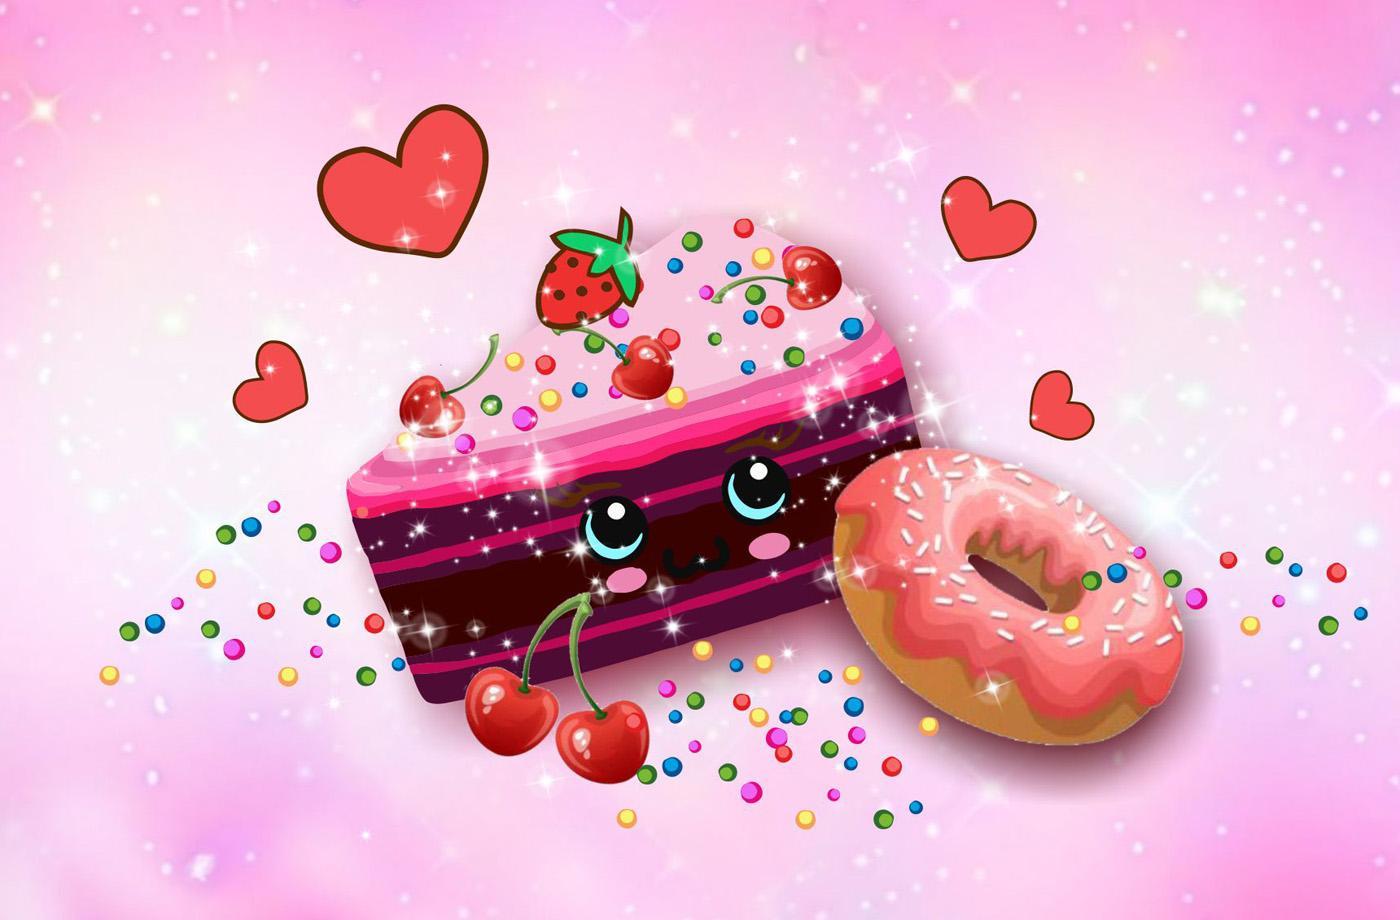 Kawaii Sweets Live Wallpaper for Android